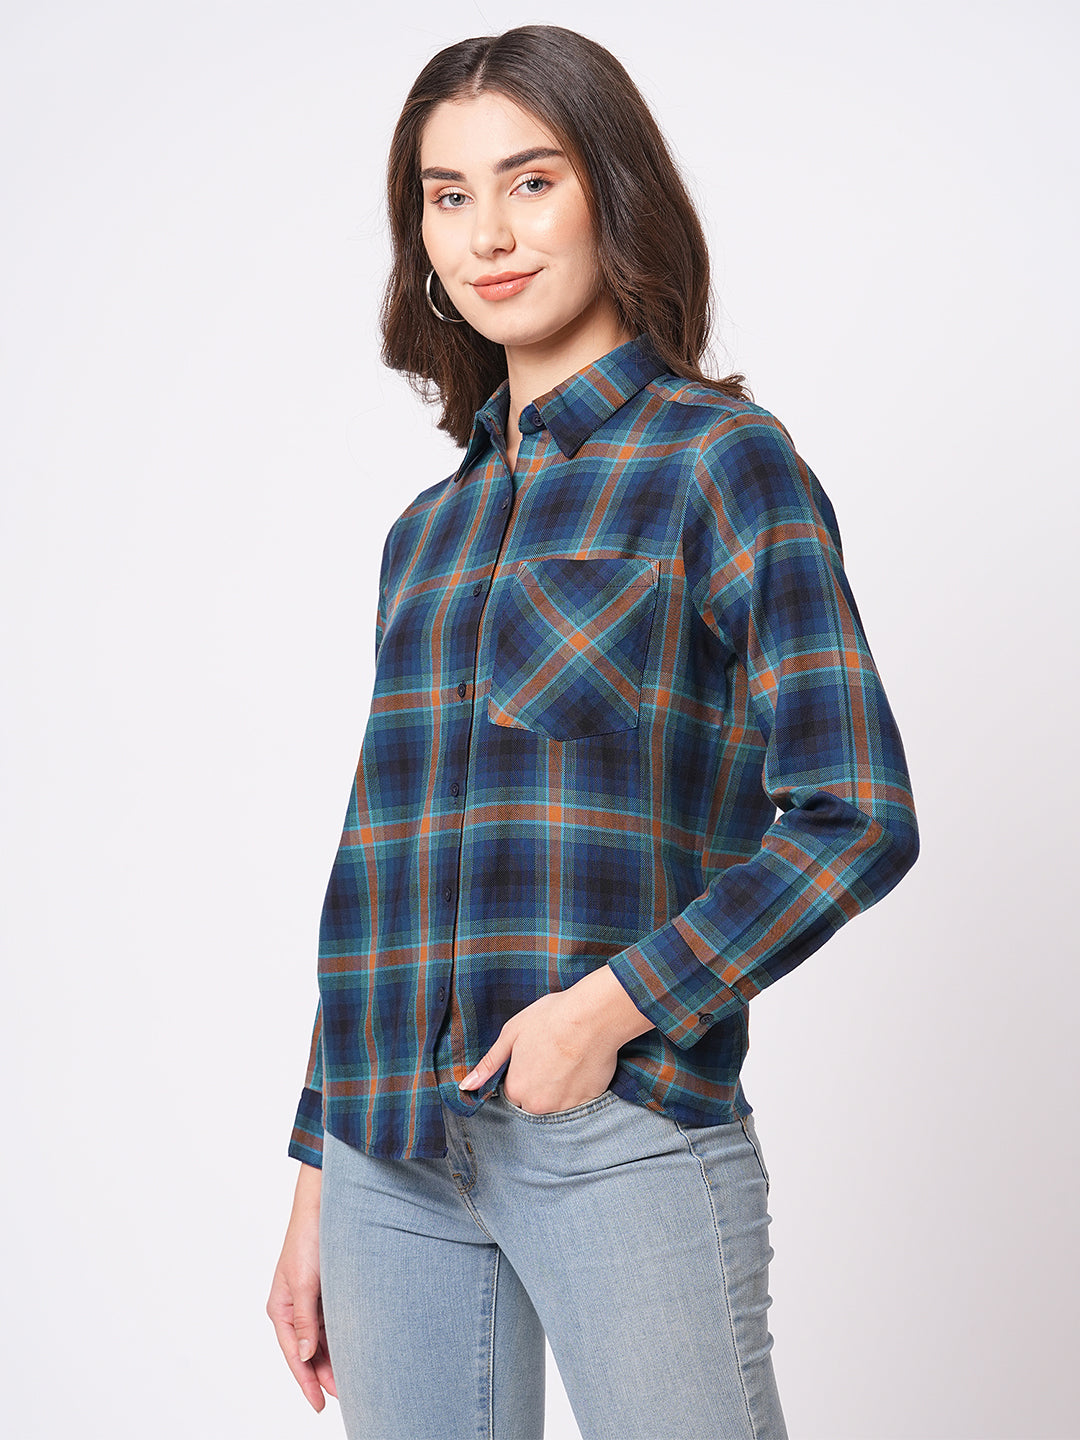 Bombay High Women's Navy Blue Chequered Relaxed Fit Full Sleeves Shirt